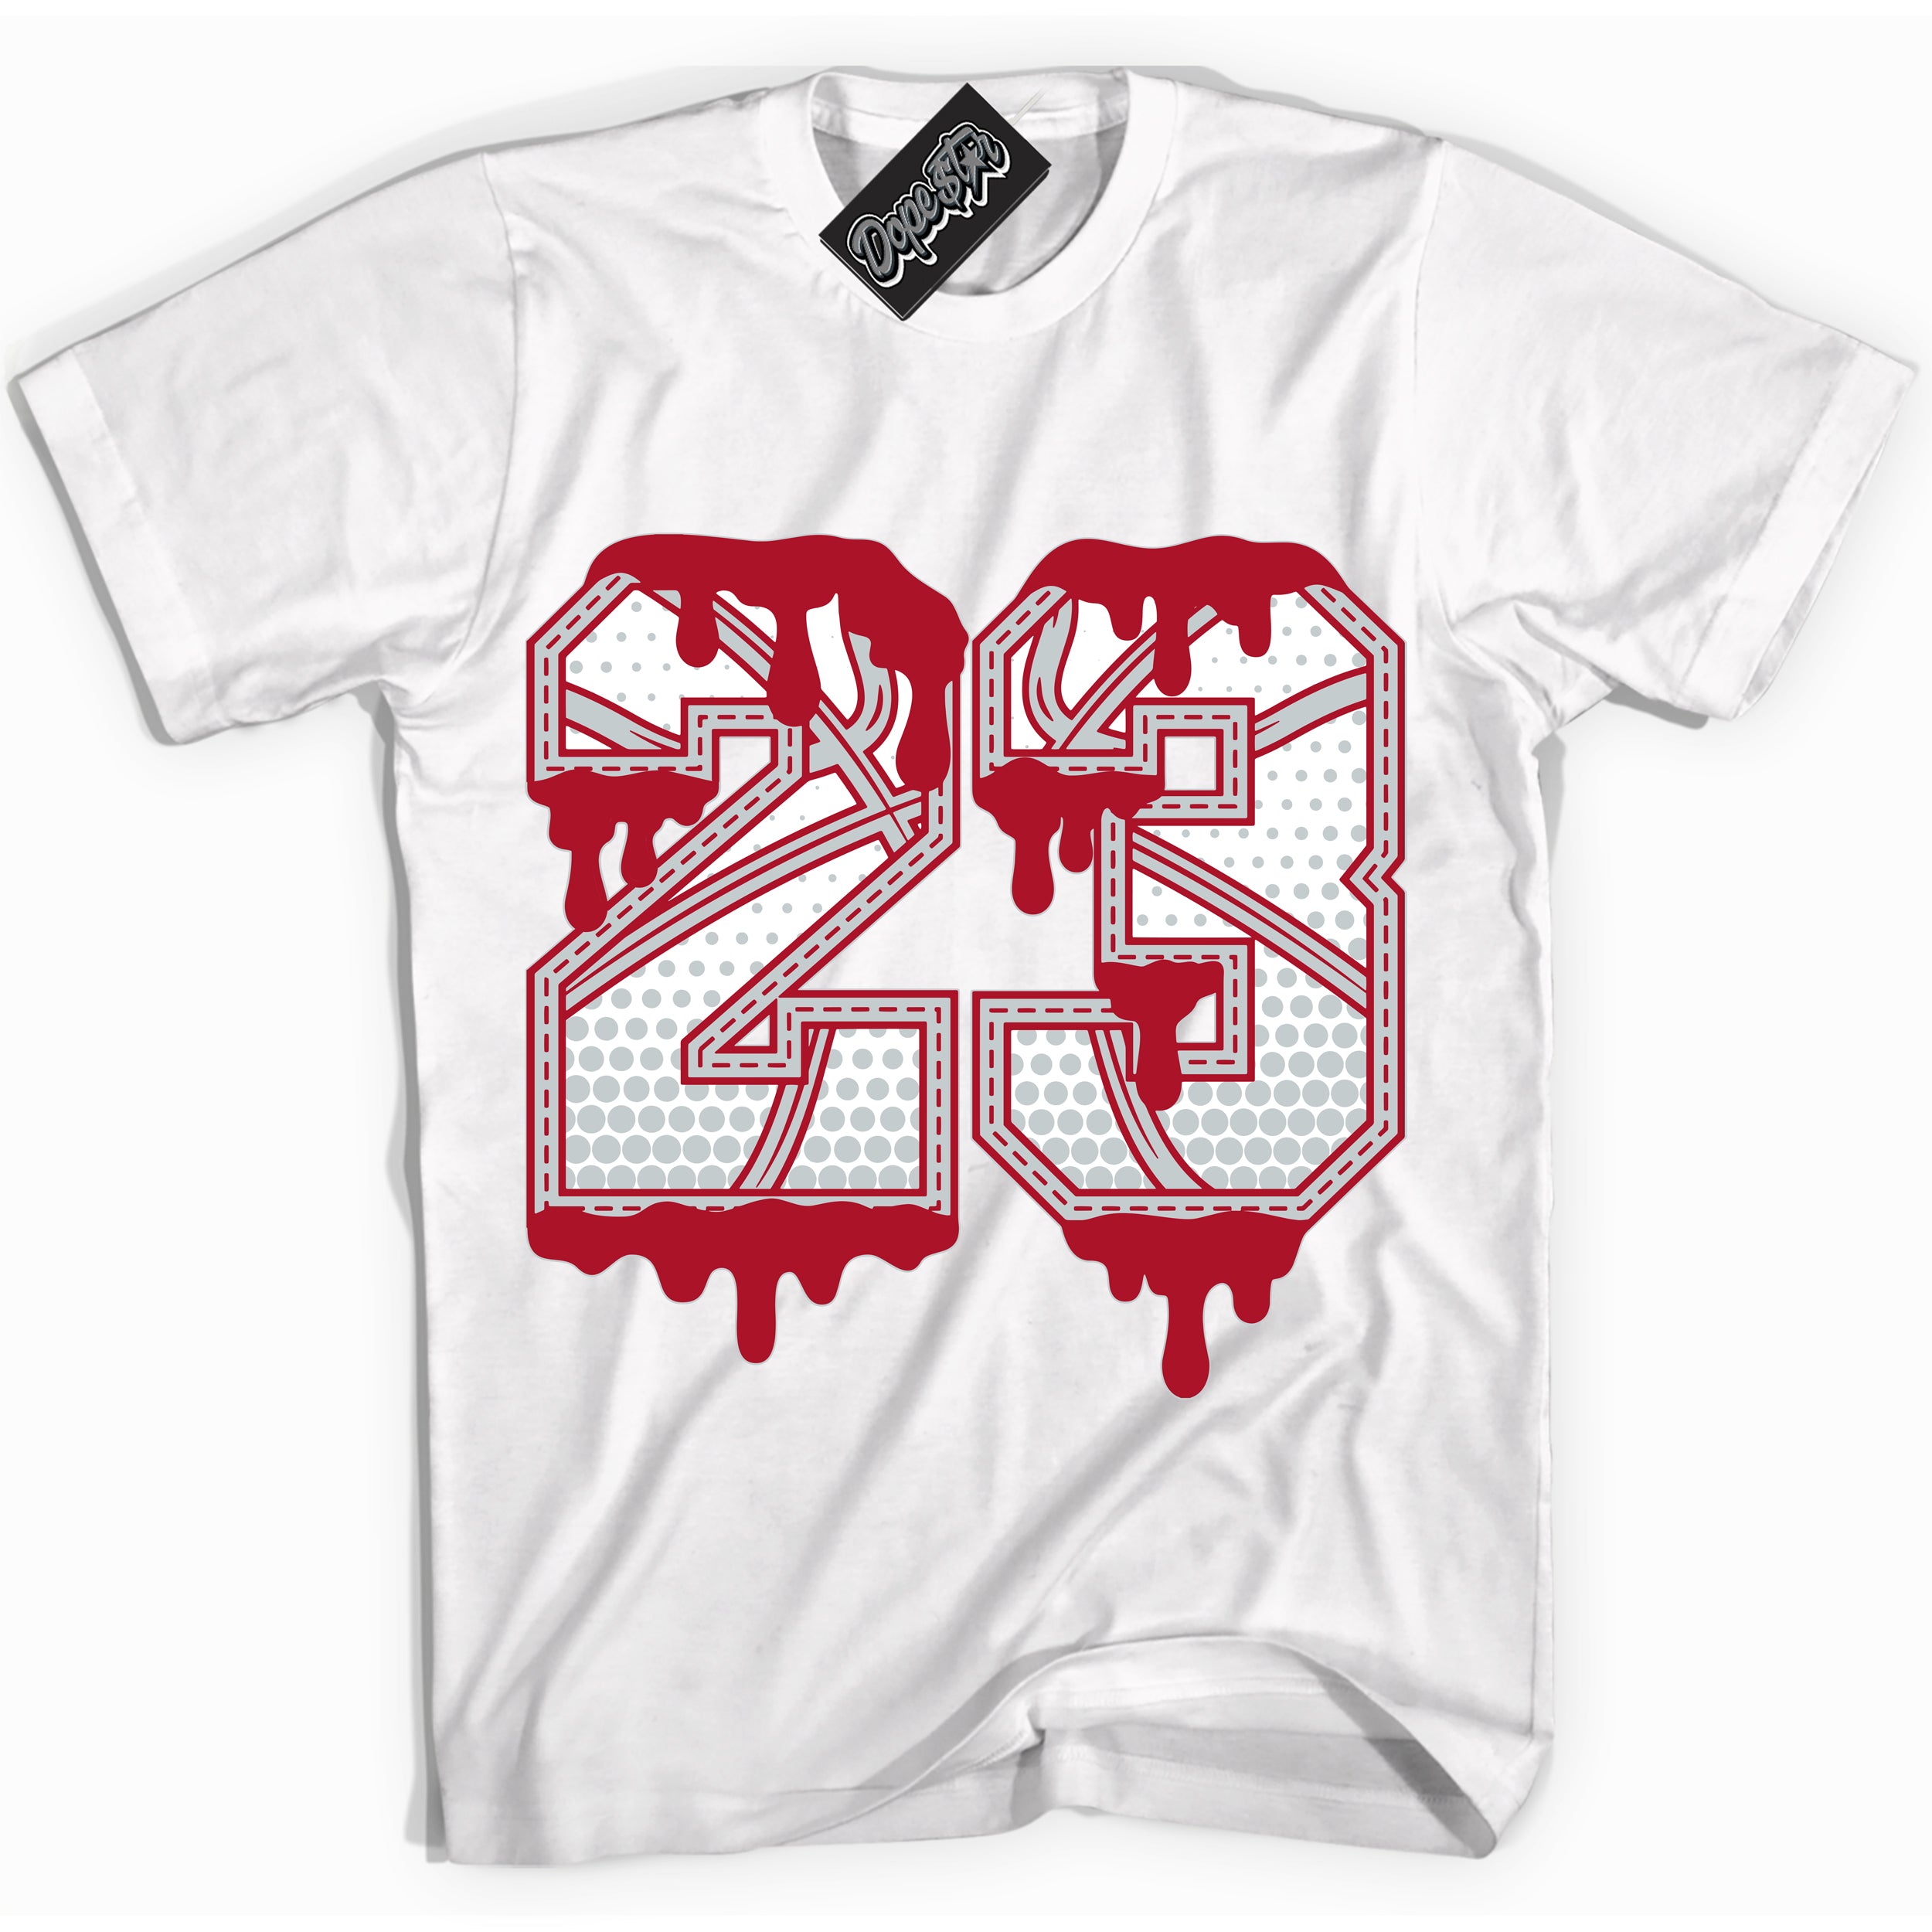 Cool White Shirt with “ 23 Ball” design that perfectly matches Reverse Ultraman Sneakers.